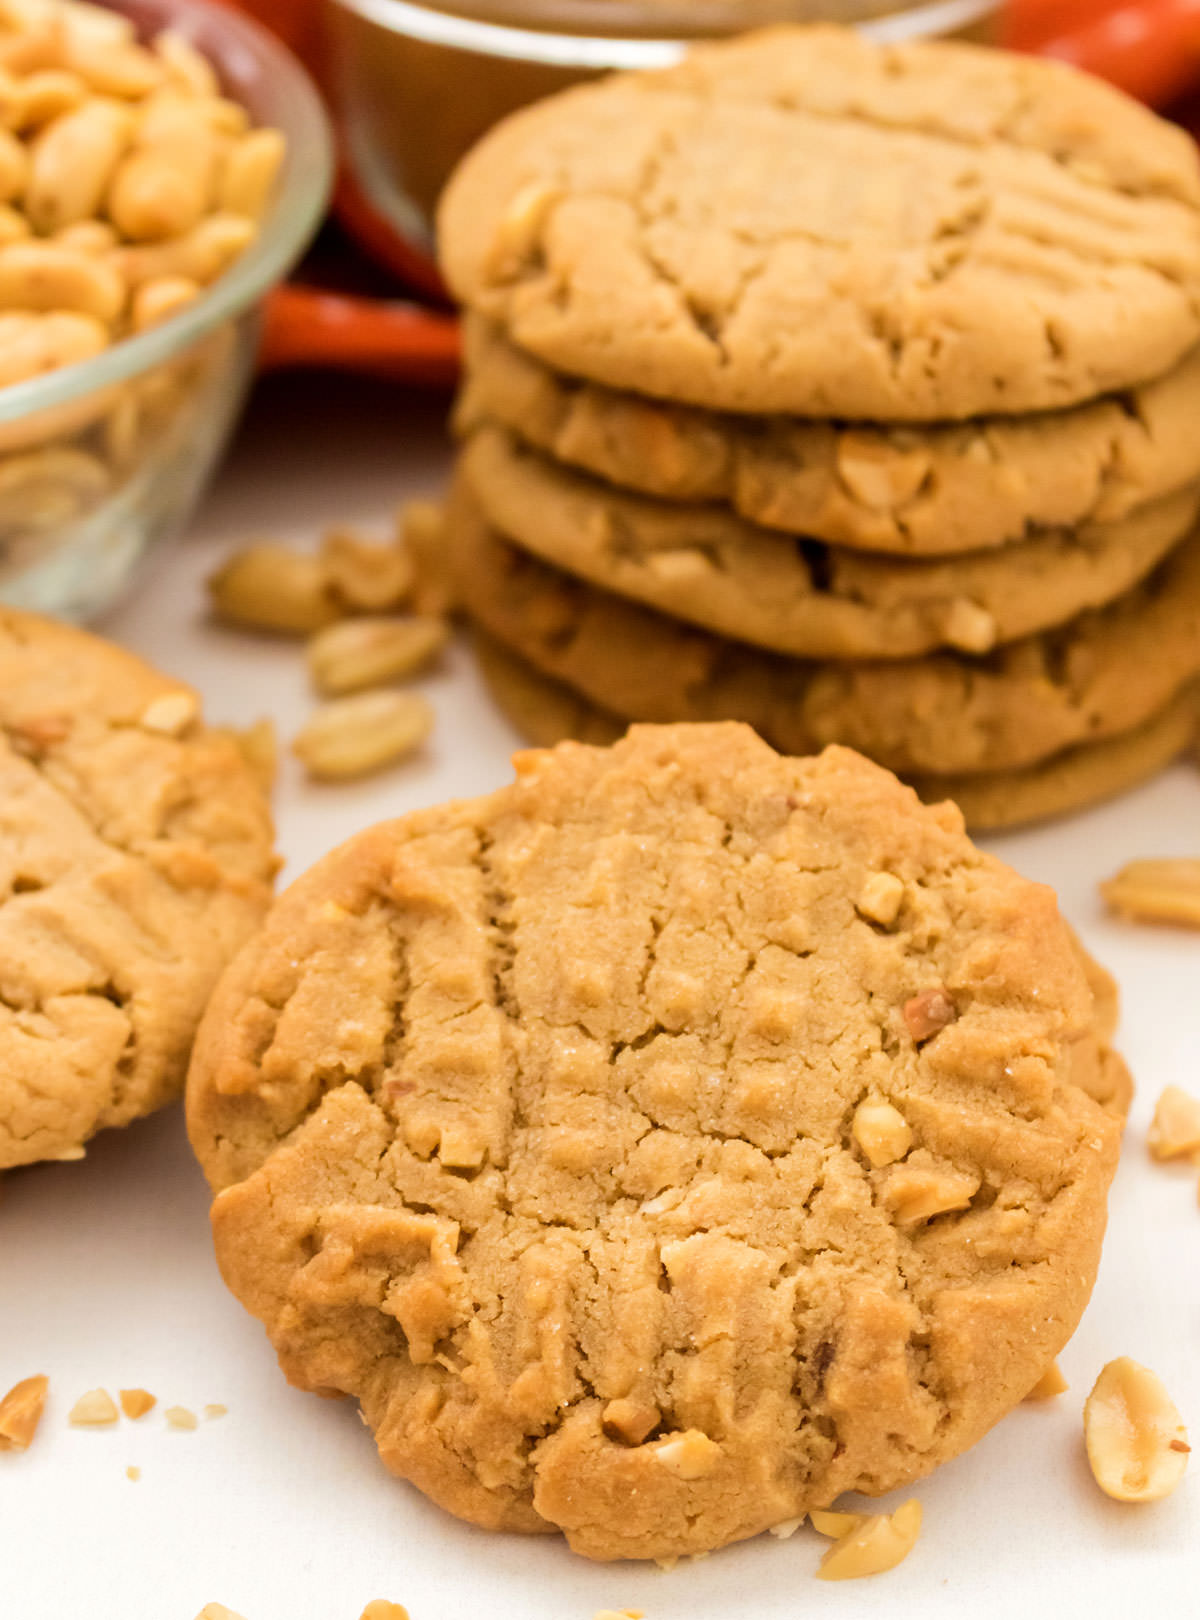 Closeup on a Chunky Peanut Butter Cookie surrounded by peanuts sitting in front of stacks of more cookies.